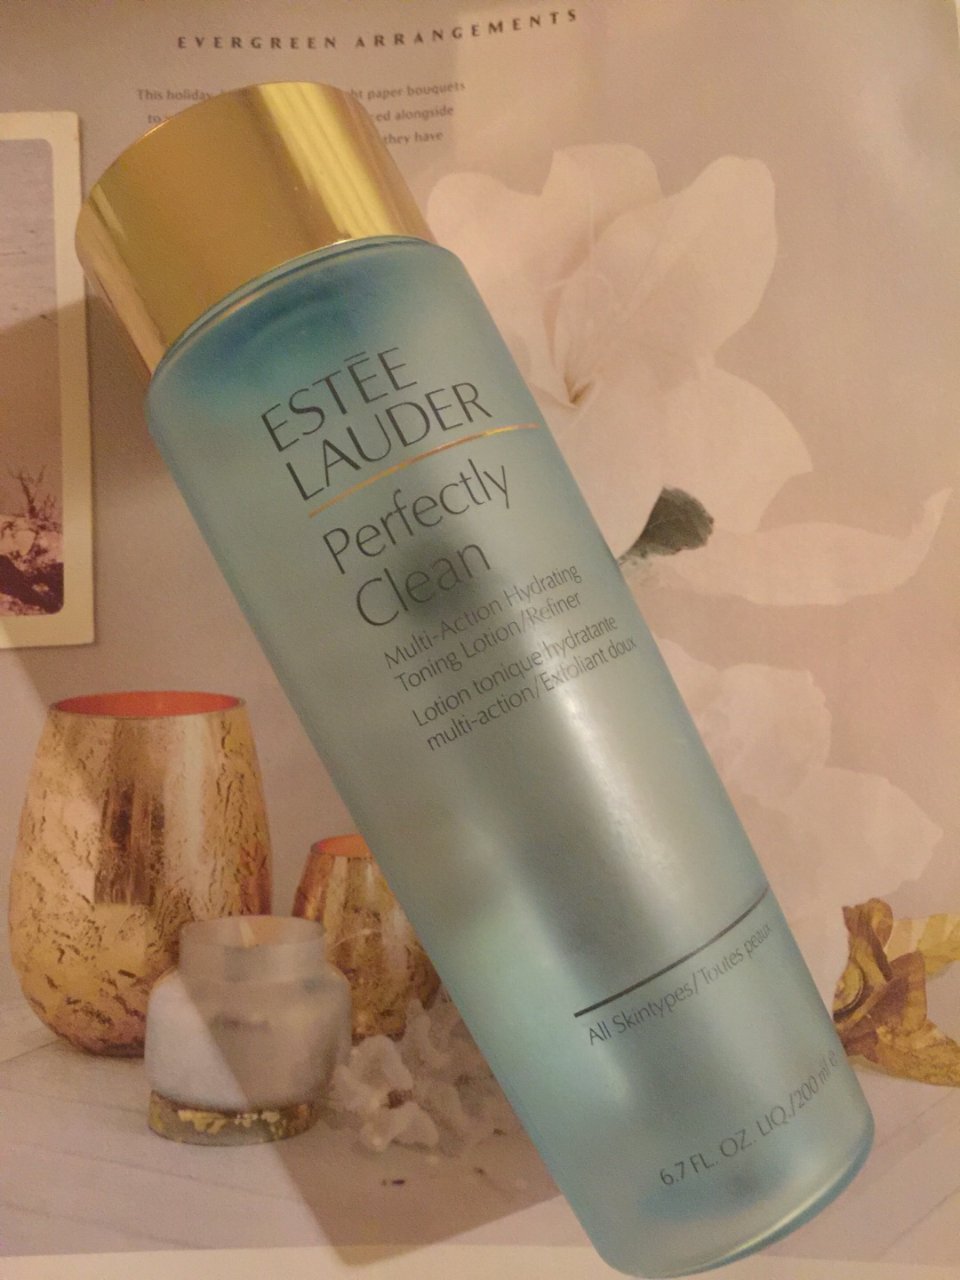 Estee Lauder Perfectly Clean